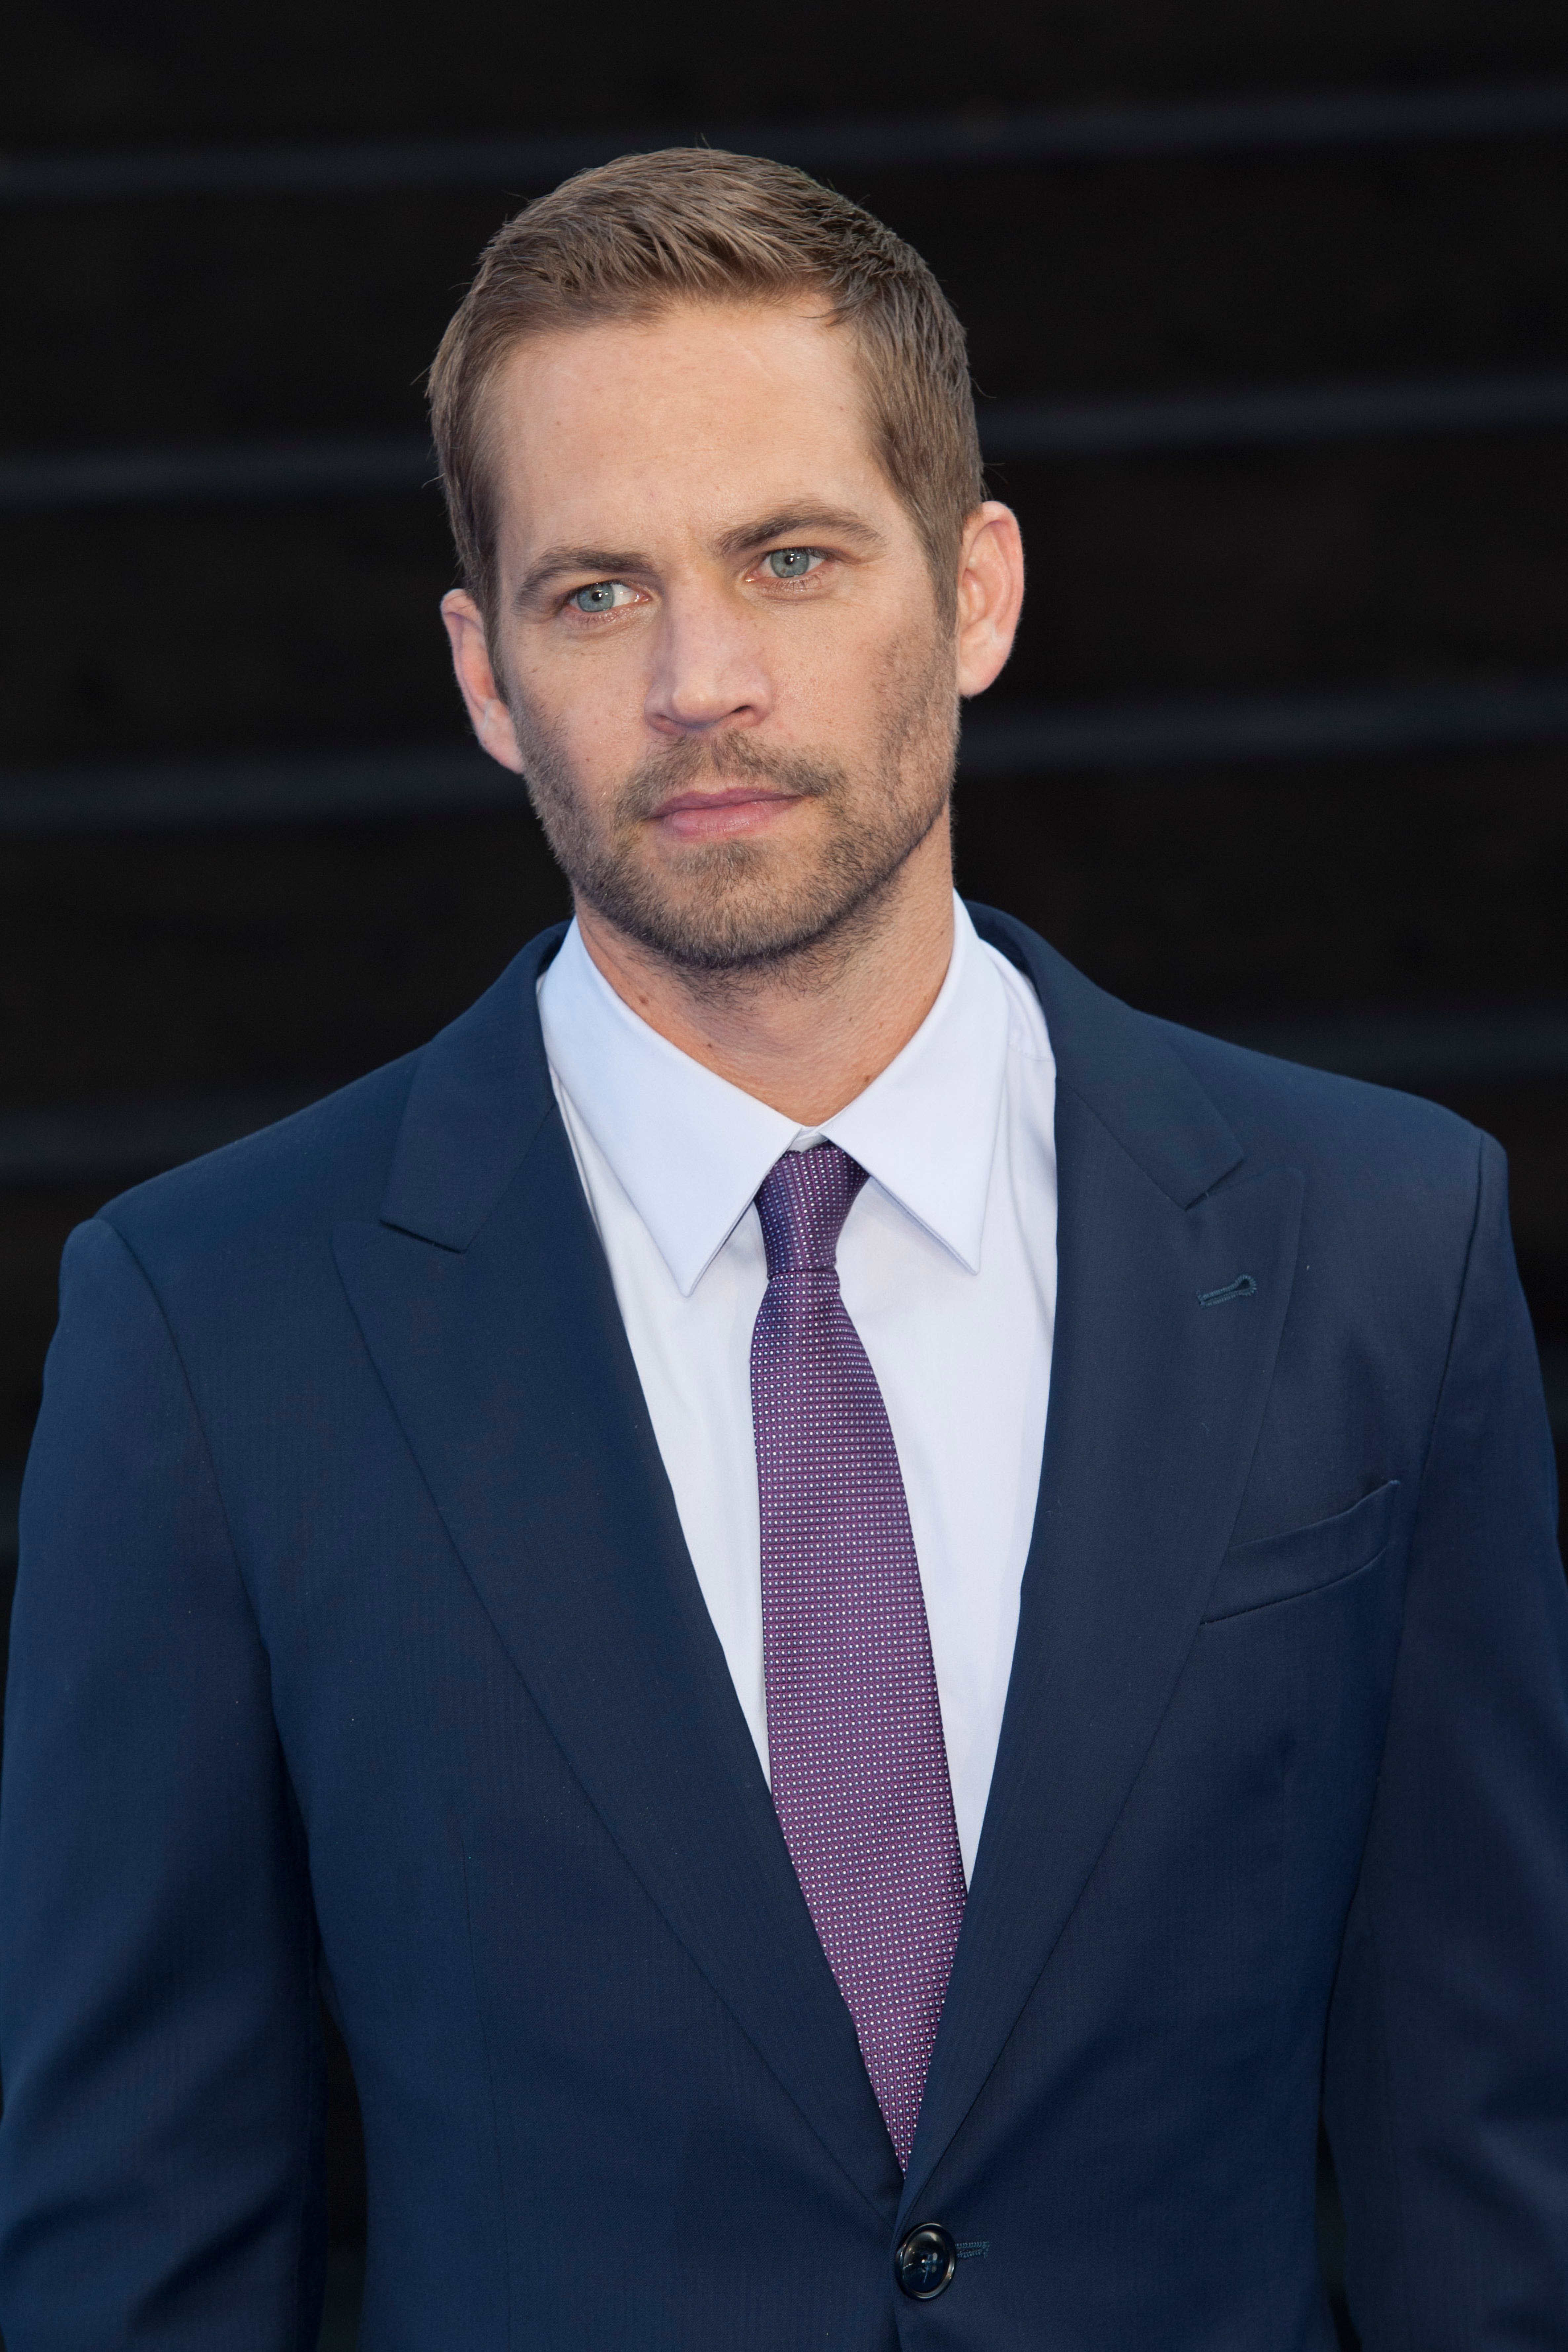 Paul Walker at the World Premiere of 'Fast & Furious 6' at Empire Leicester Square on May 7, 2013 in London | Photo: Shutterstock